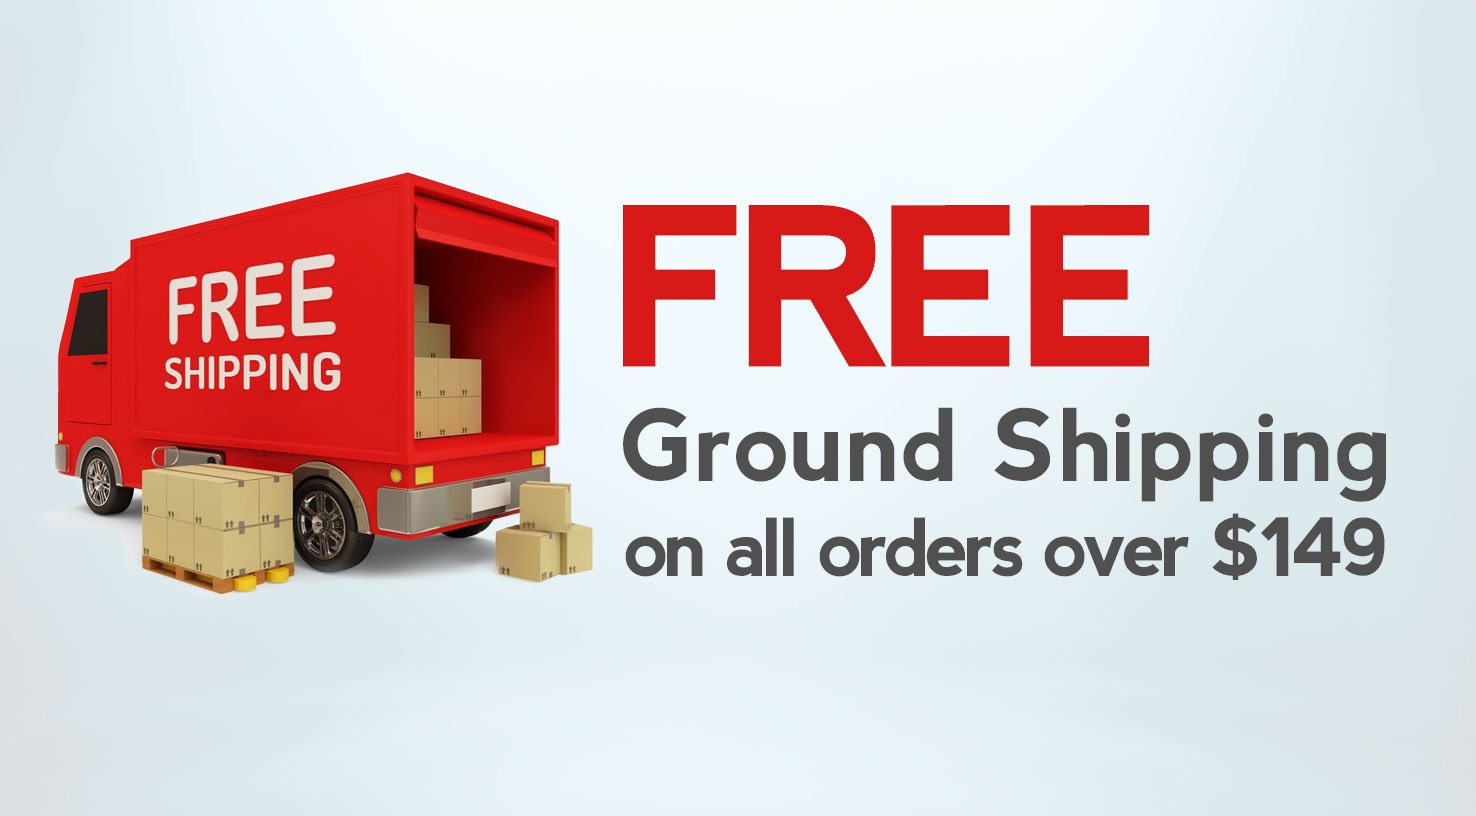 FREE Ground Shipping on orders over C$149